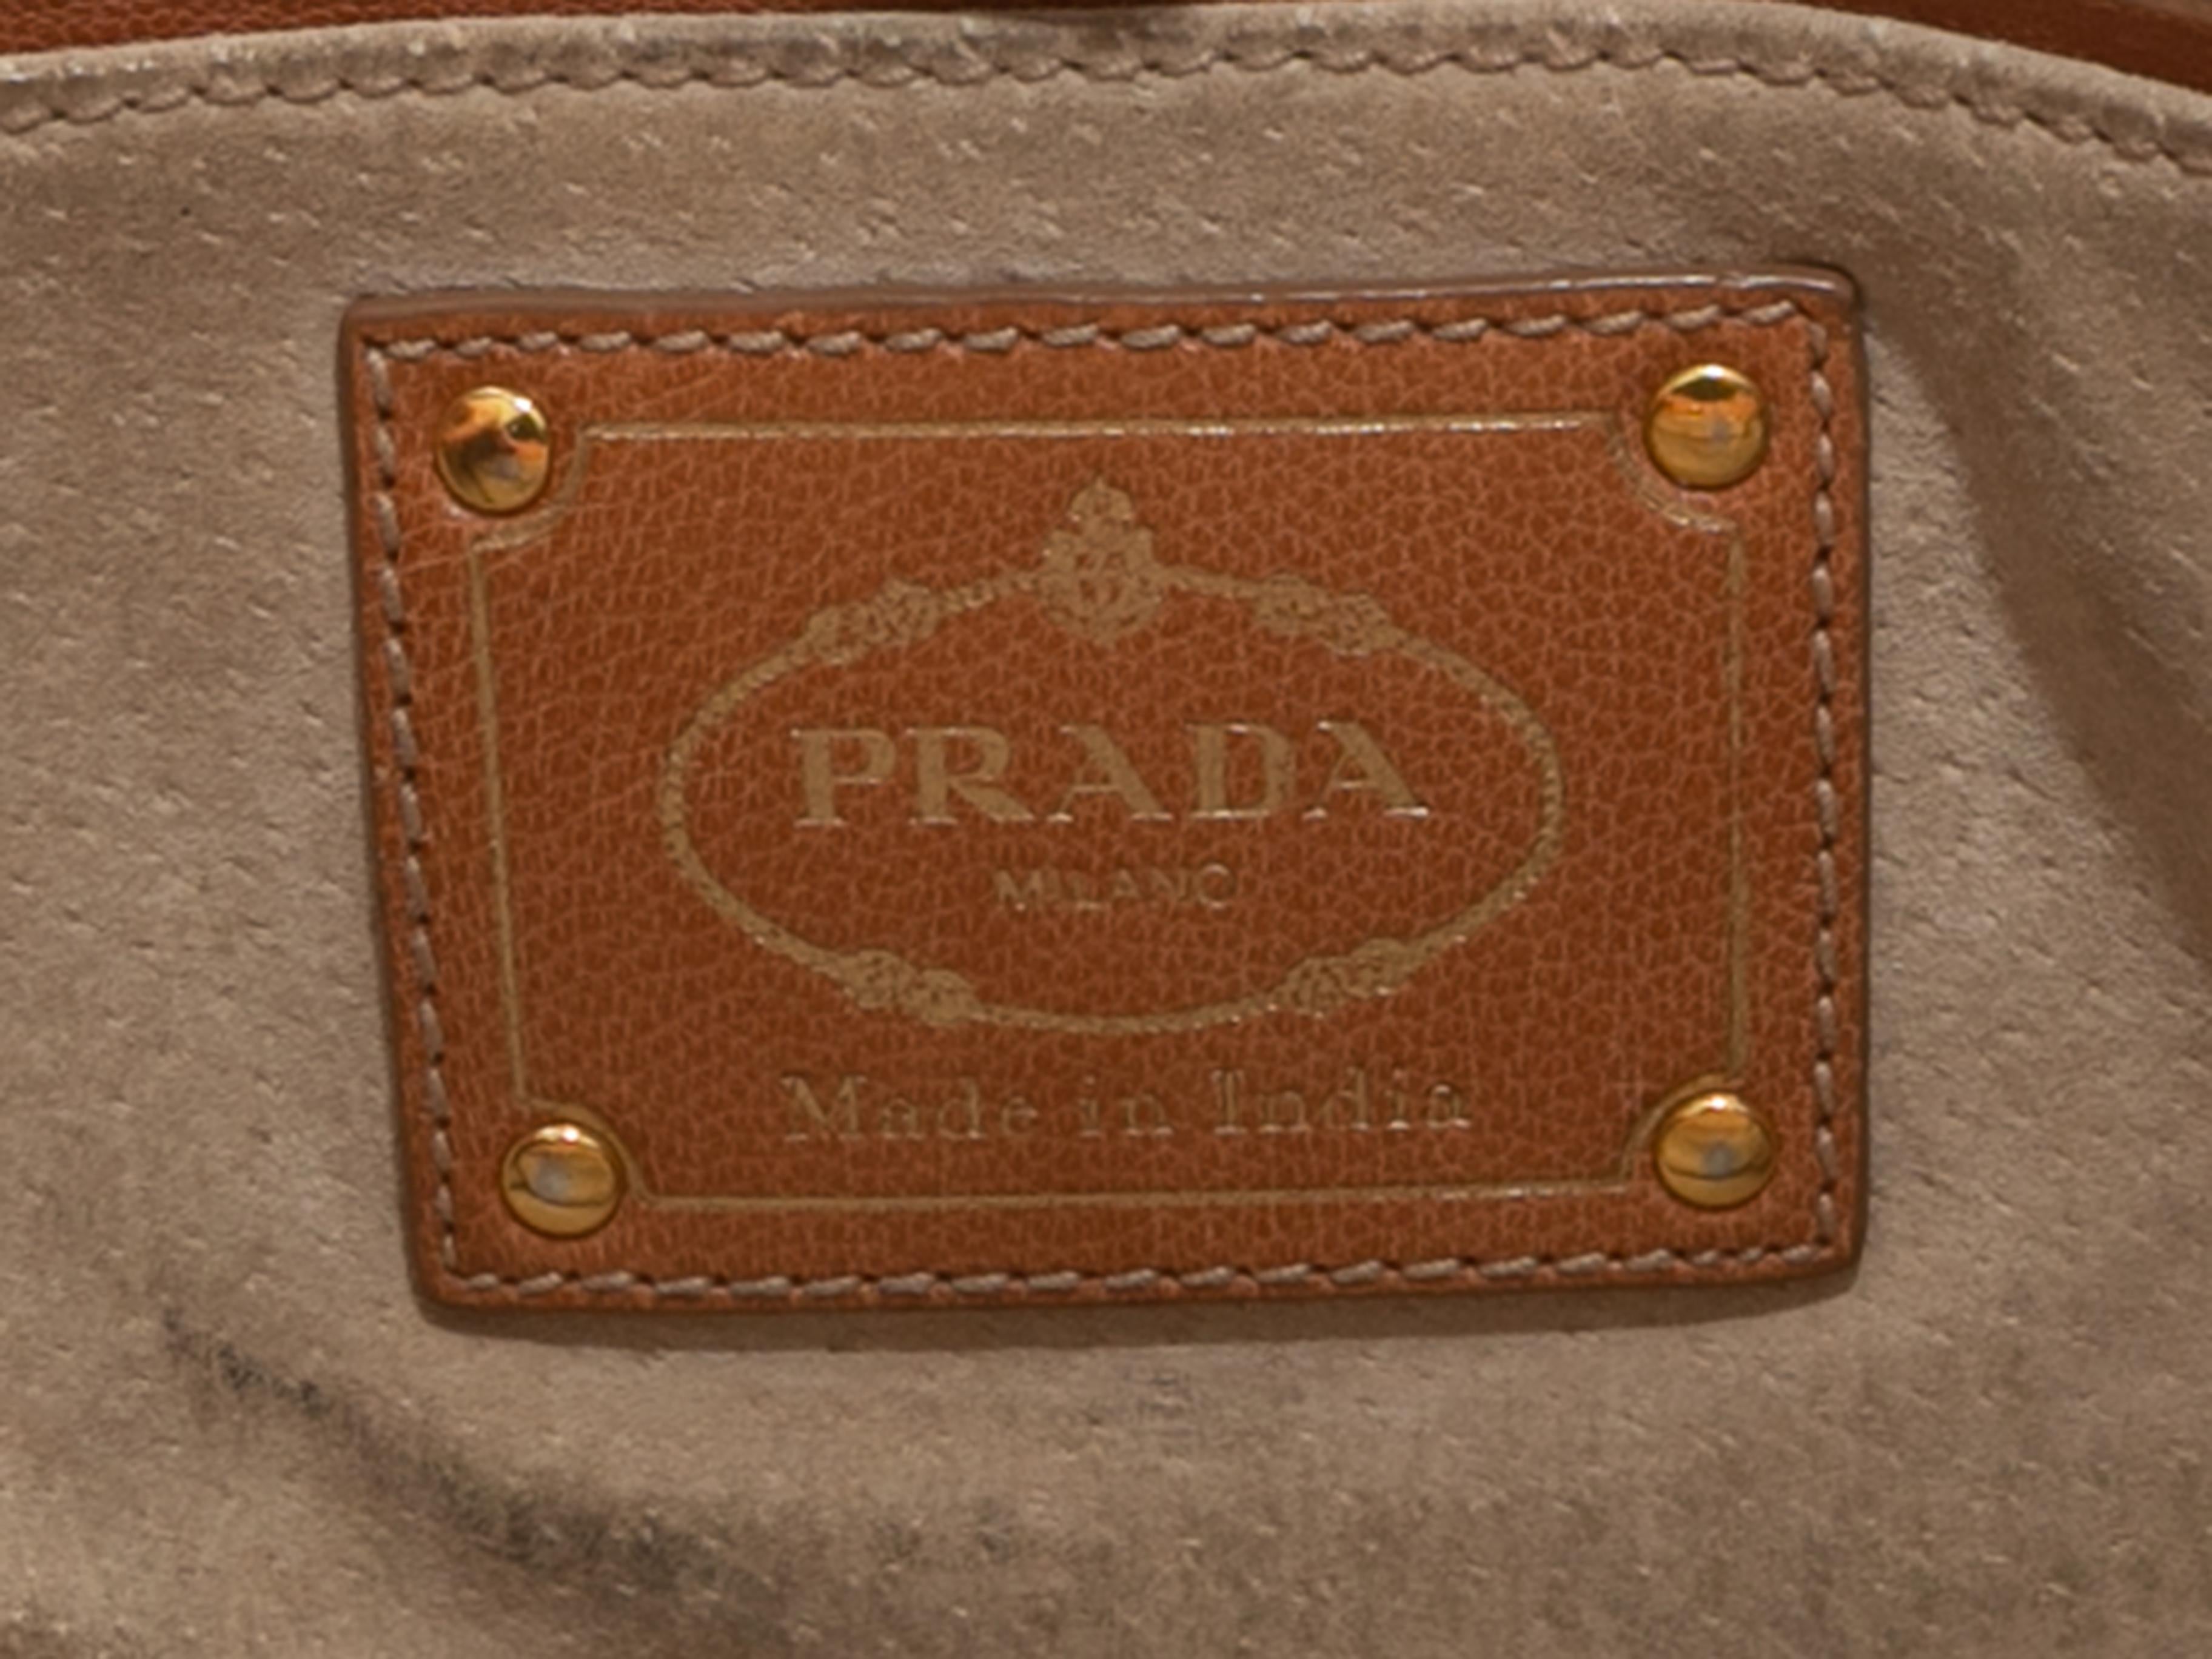 Product Details: Tan Prada Madras Woven Tote Bag. The Madras Bag features a woven leather body, gold-tone hardware, dual rolled top handles, optional flat shoulder strap, and a magnetic closure at the top. 13